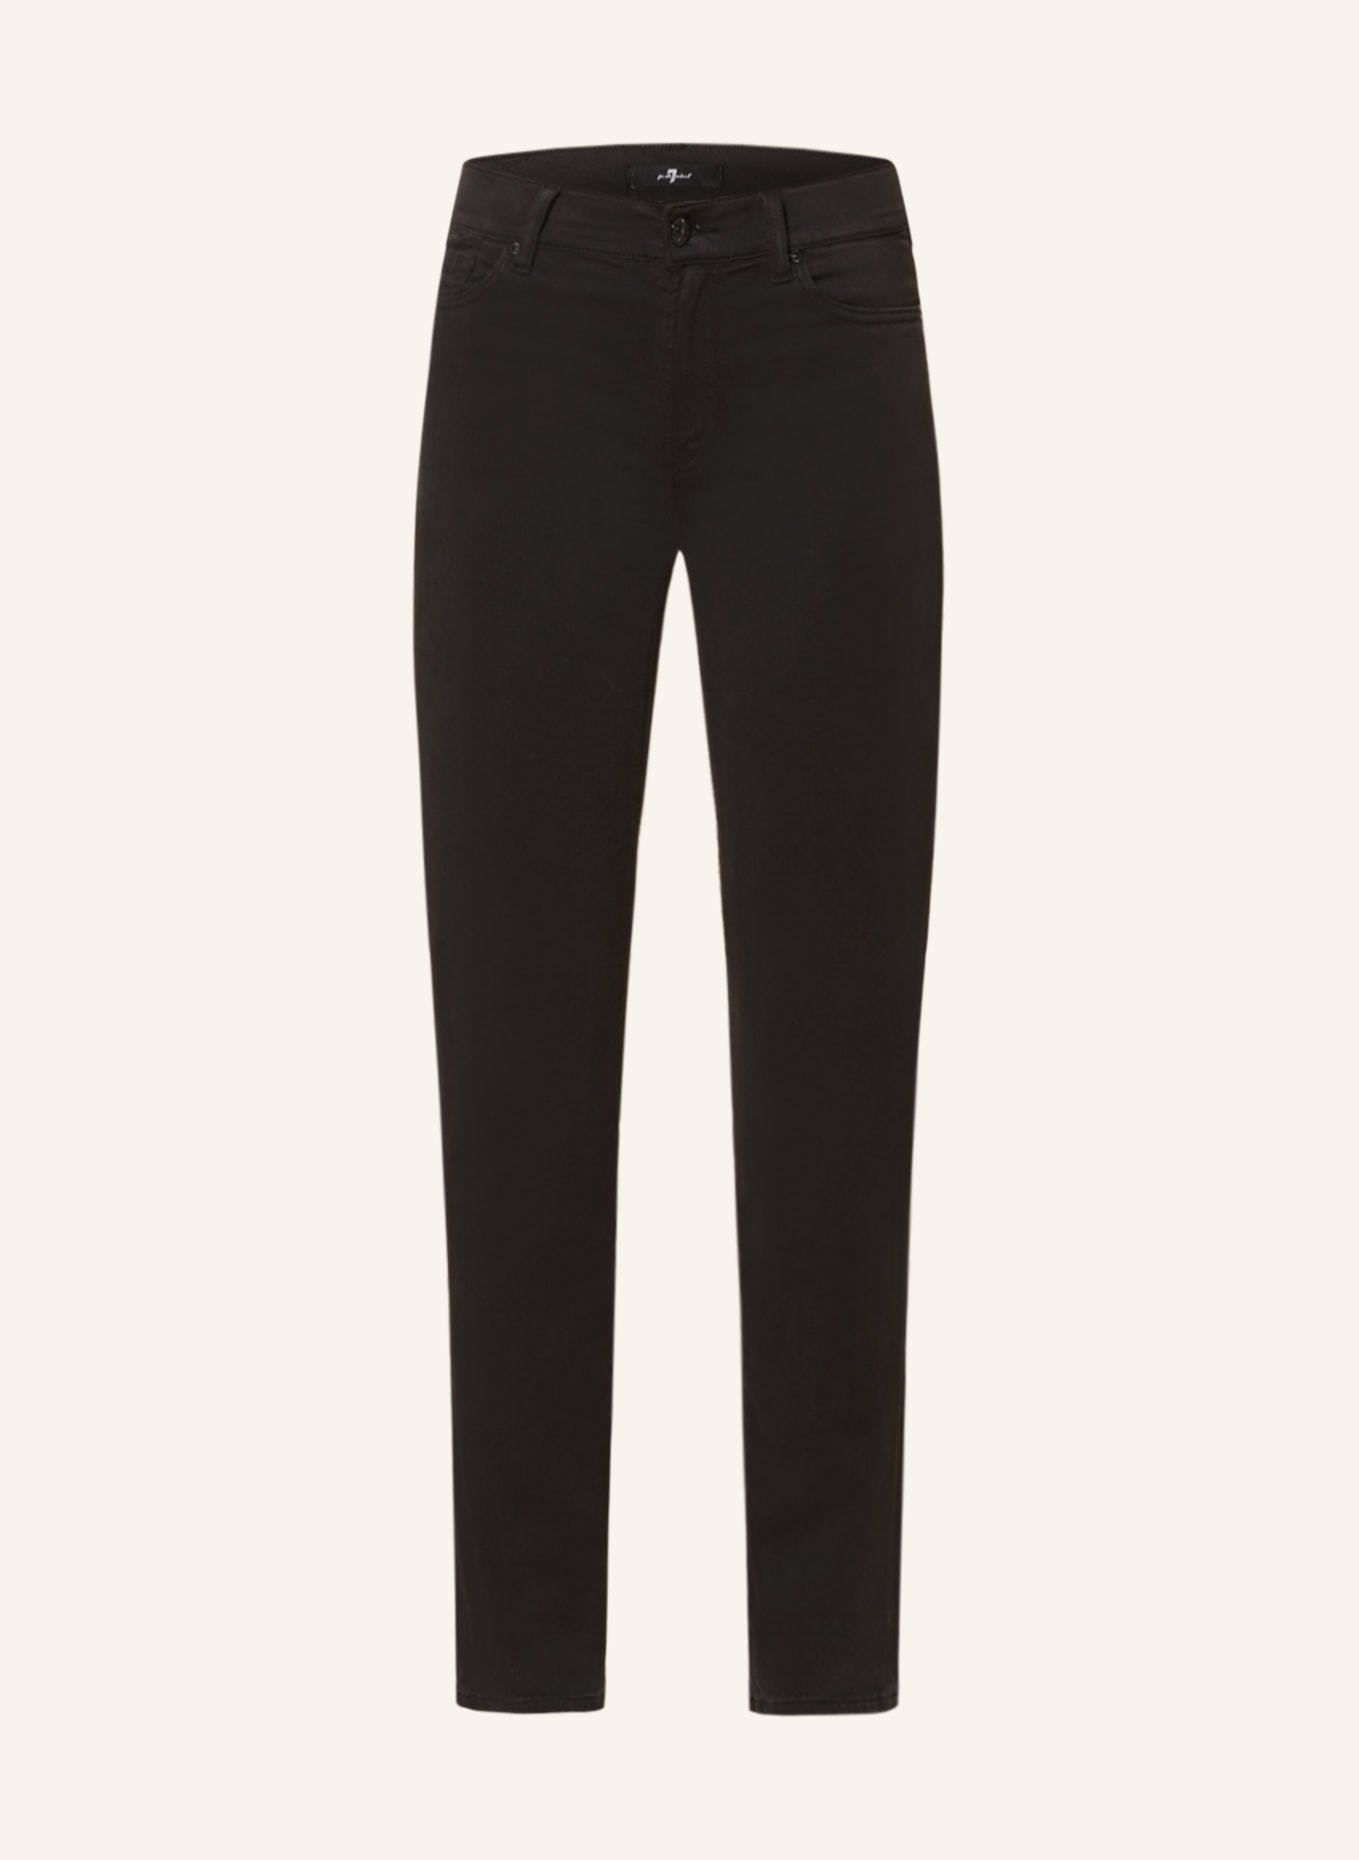 7 For All Mankind Skinny Sateen Jeans